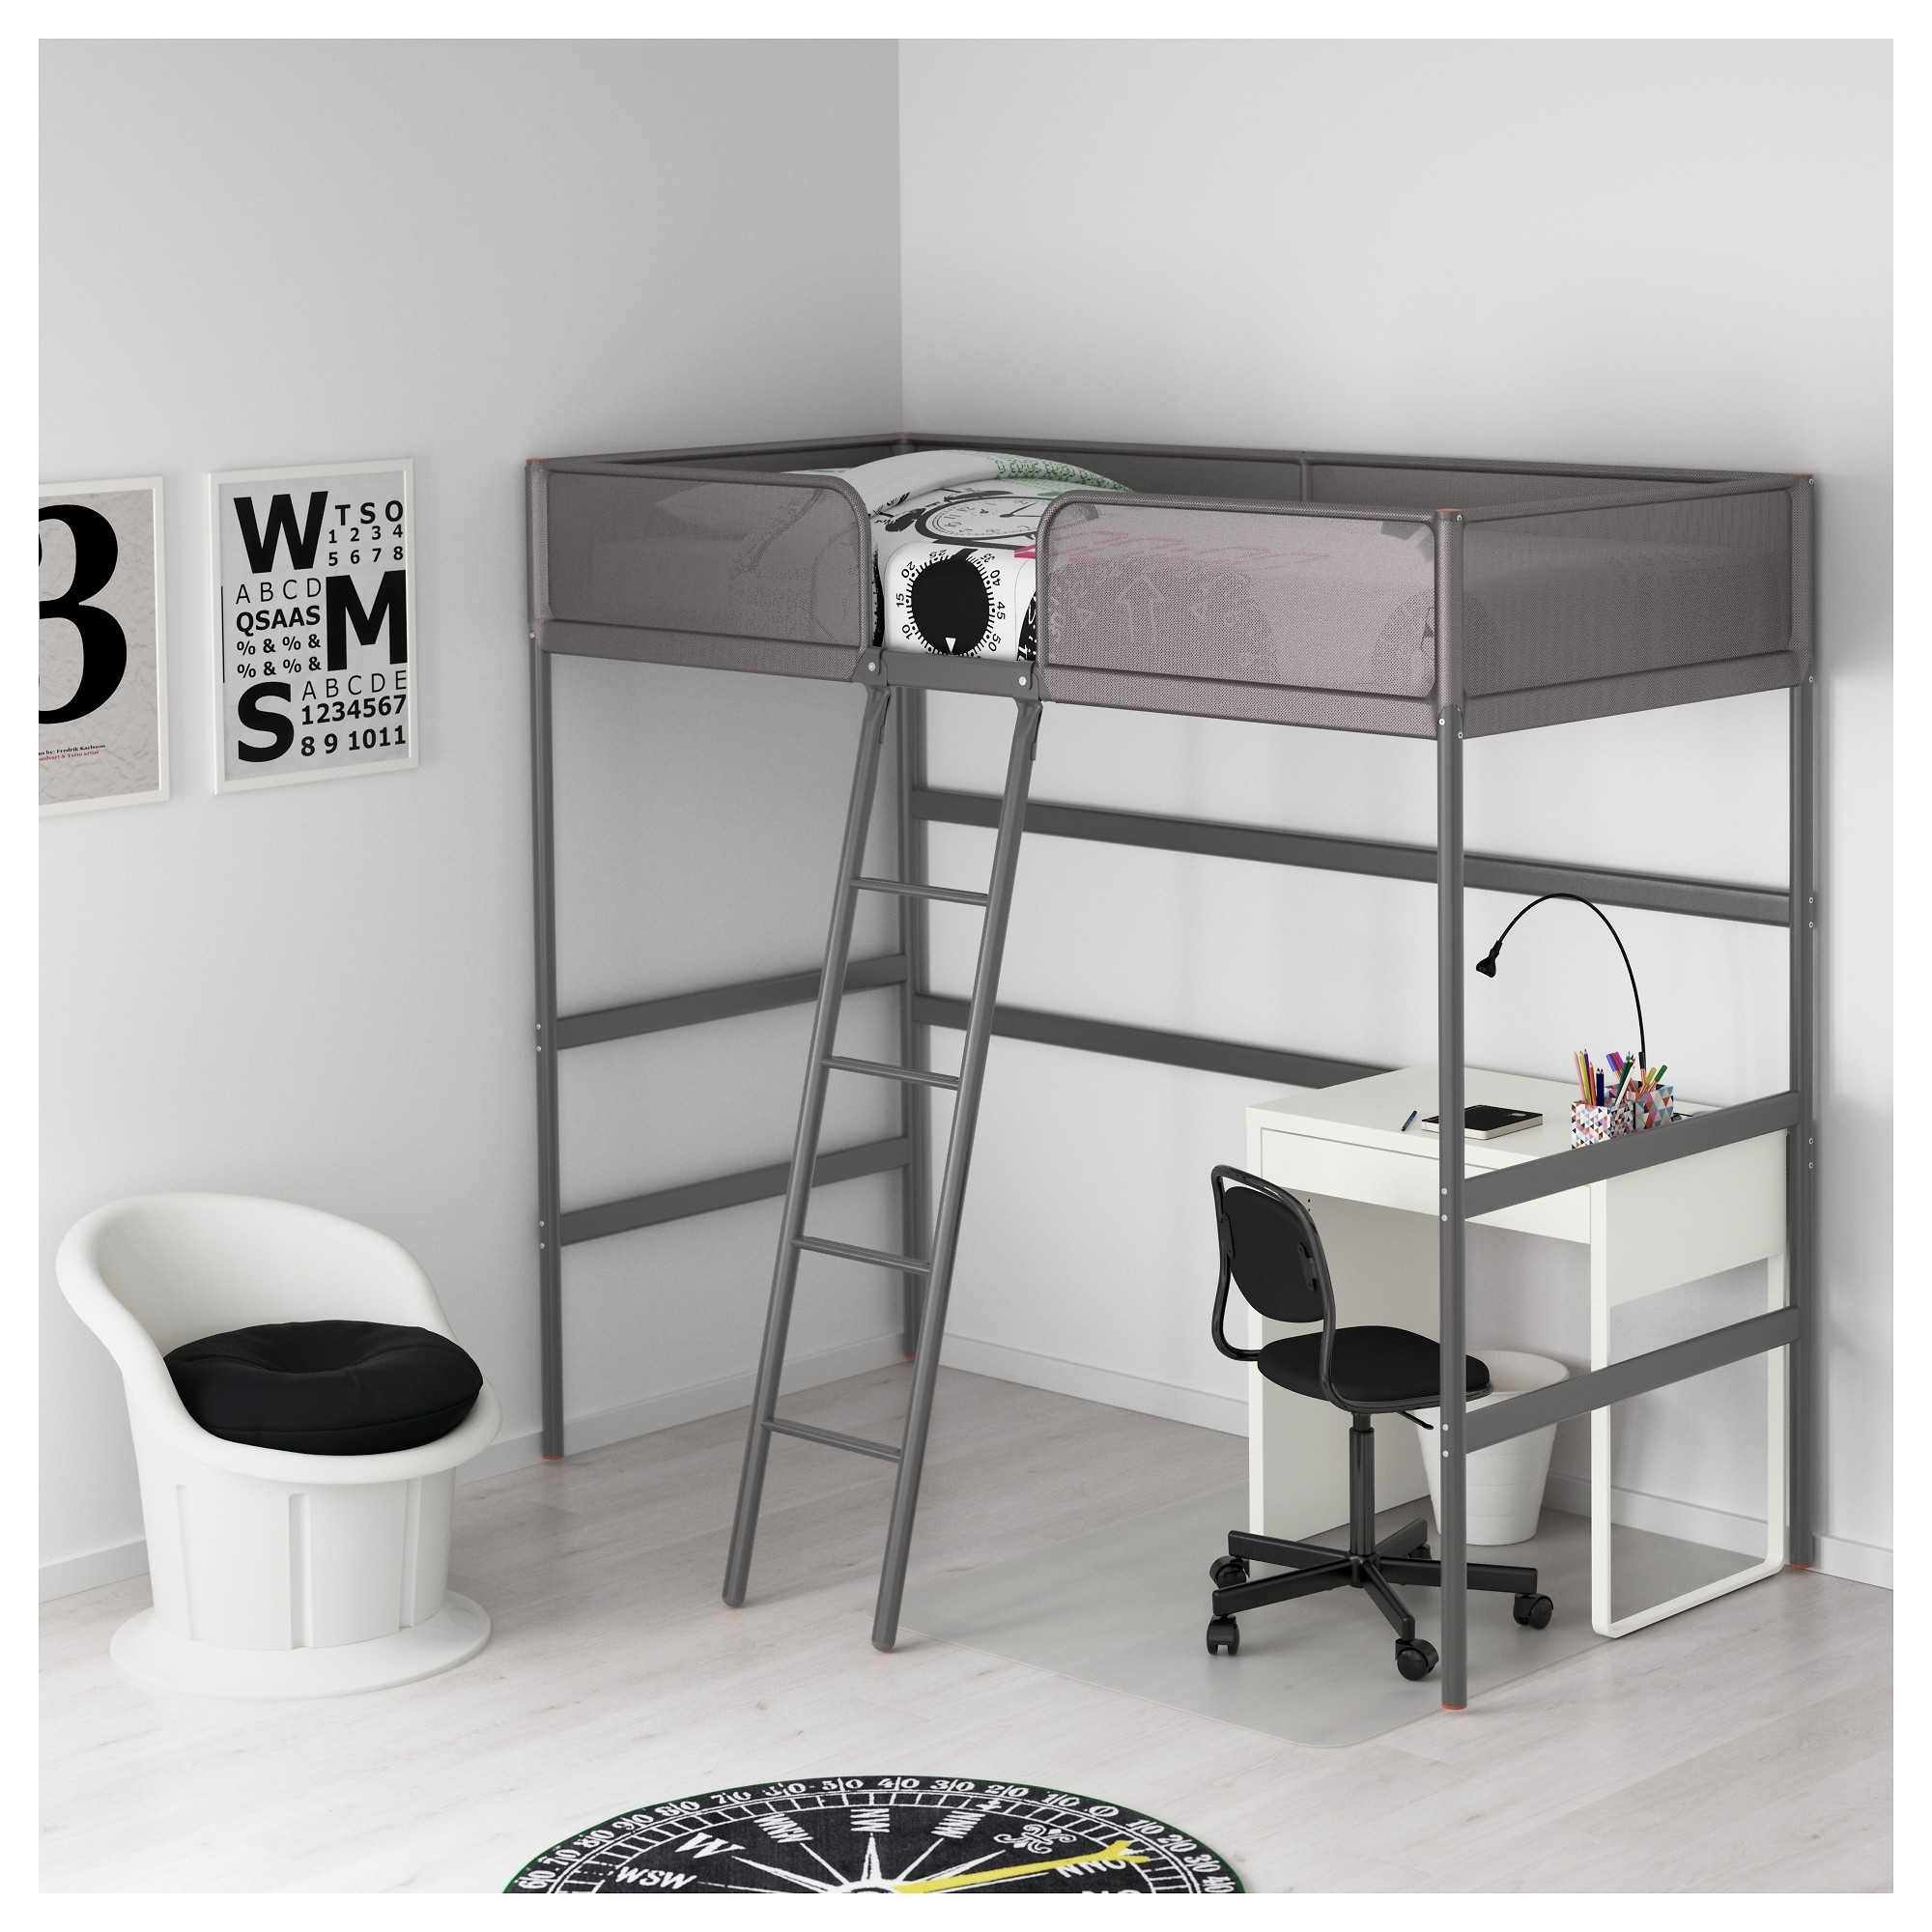 Ikea Loft Beds To Or Not In, What Is The Weight Limit On Ikea Loft Bed